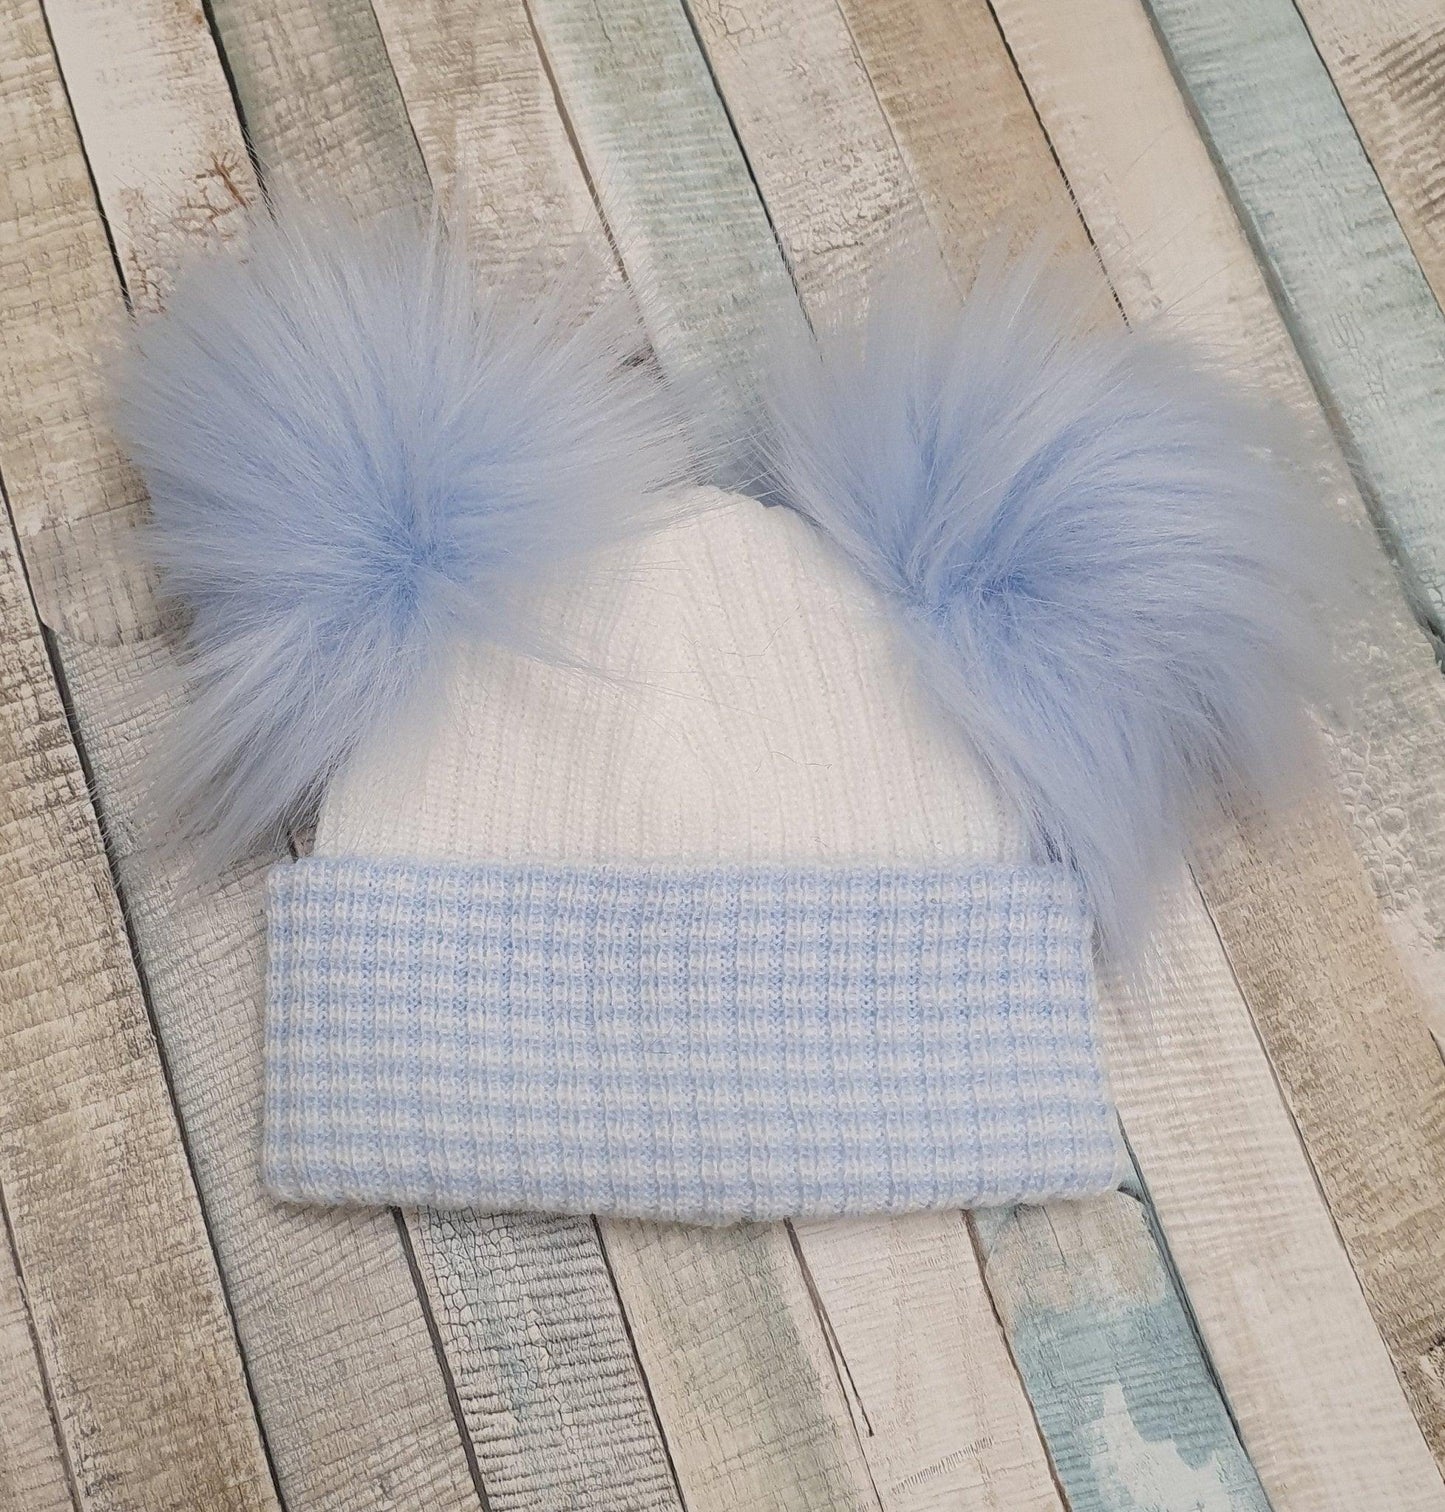 First Size Ribbed Knitted Double Faux Fluffy Fur Baby Pom Pom Hat - Nana B Baby & Childrenswear Boutique